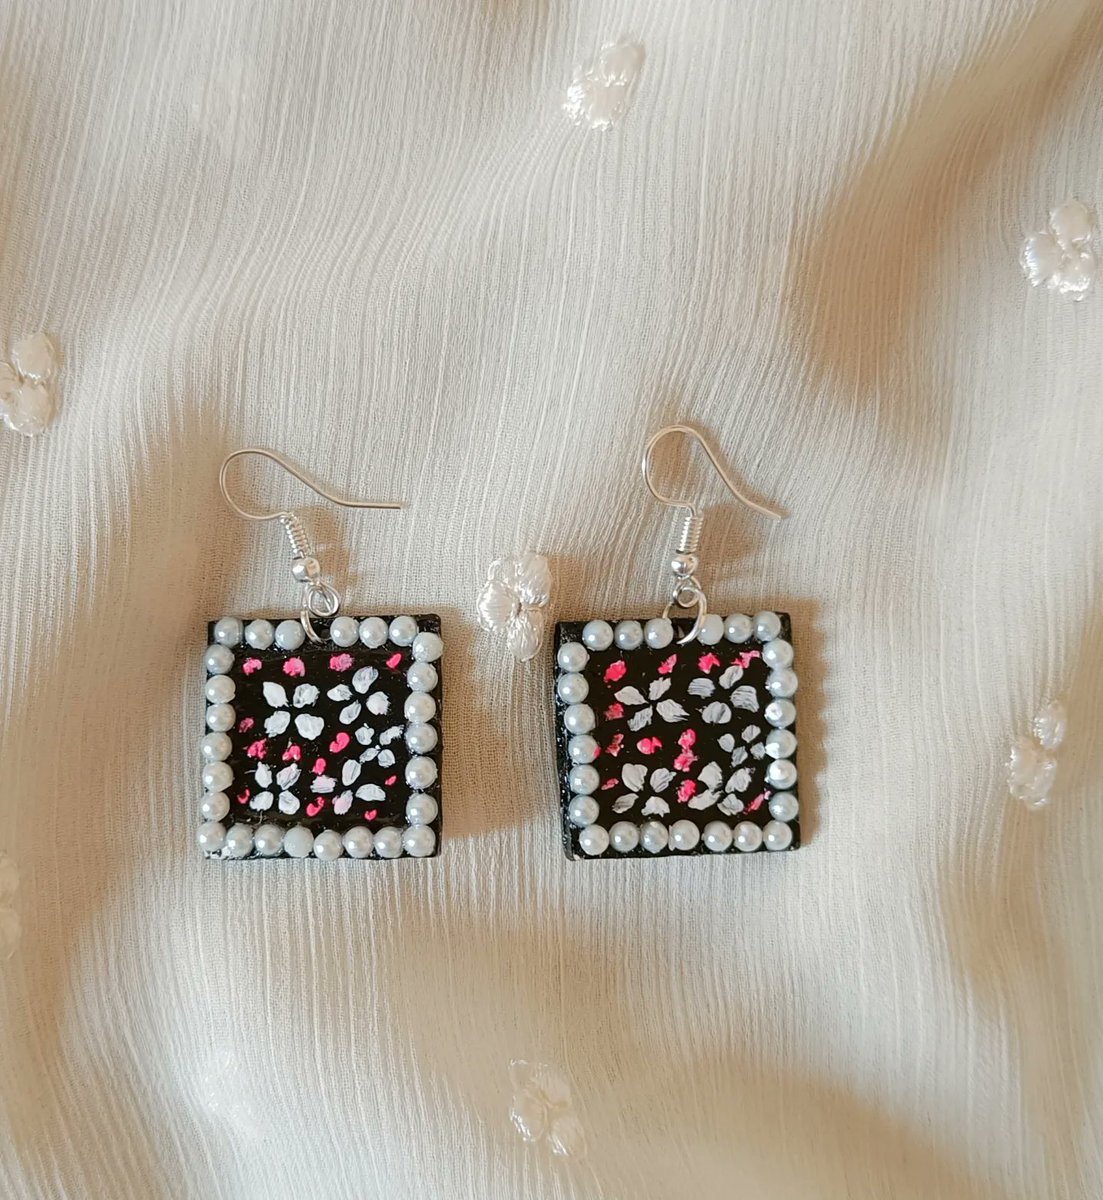 Adding two more pairs of earrings to the #ArtbyTee #wearableart collection. DM for prices & other details to buy. Share to support my work. #MothersDayGifts #mothersdaygiftideas #gifthandmade #giftsforher #giftsformom #earrings #handmadejewellery #handmadegifts #jewelrylover